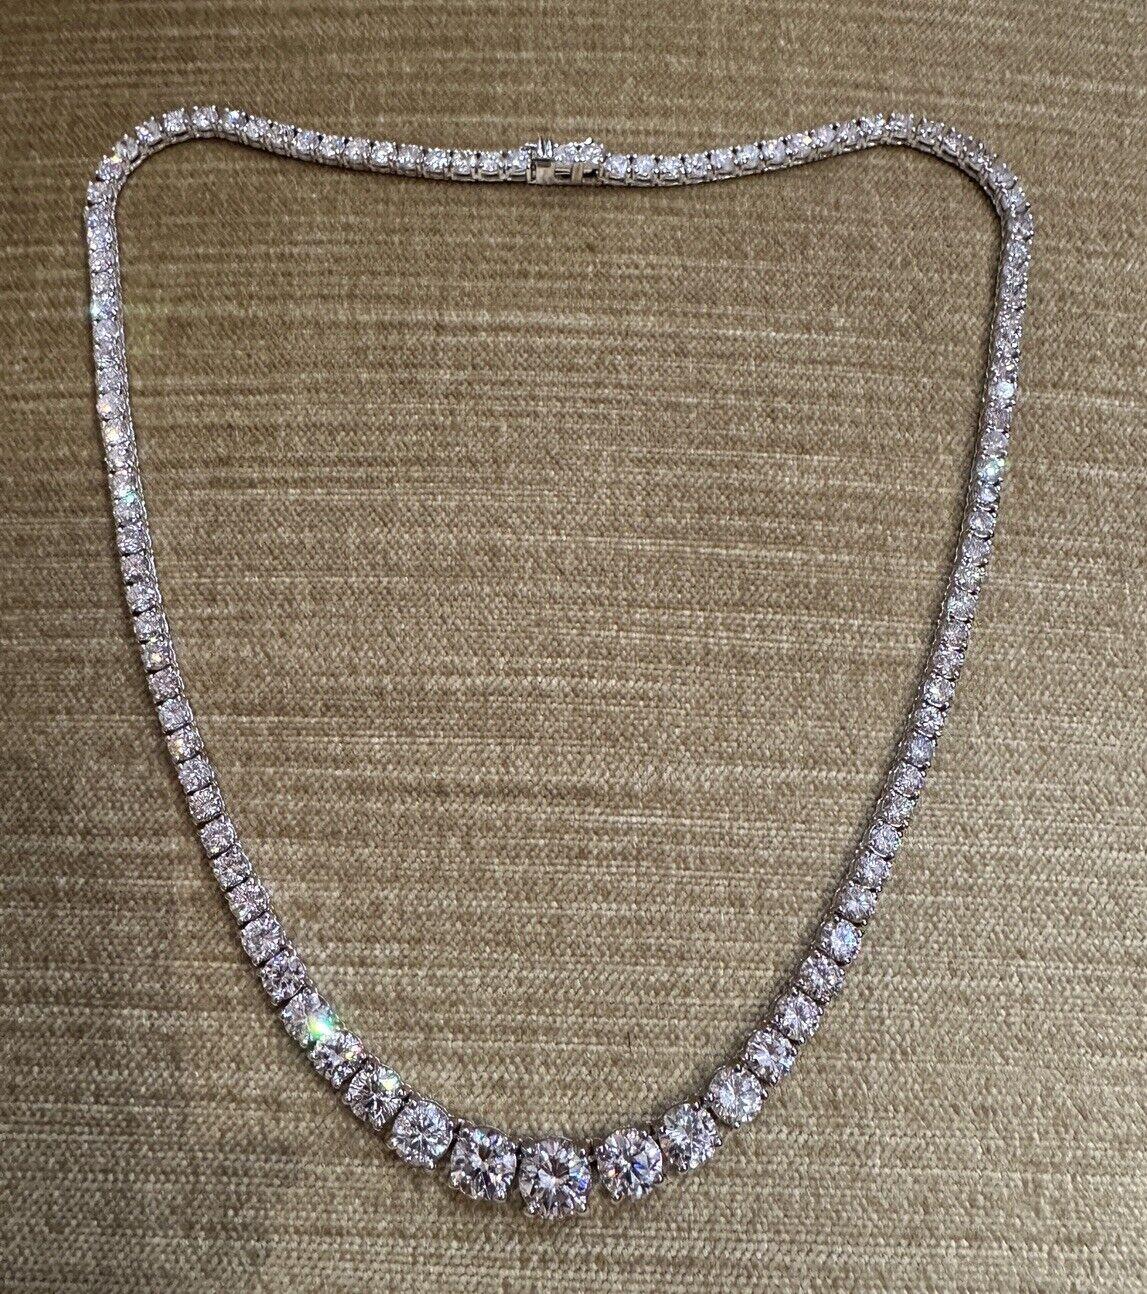 Diamond Riviera Necklace 24.12 Carat Total in 4-prong 18k White Gold setting In Excellent Condition For Sale In La Jolla, CA